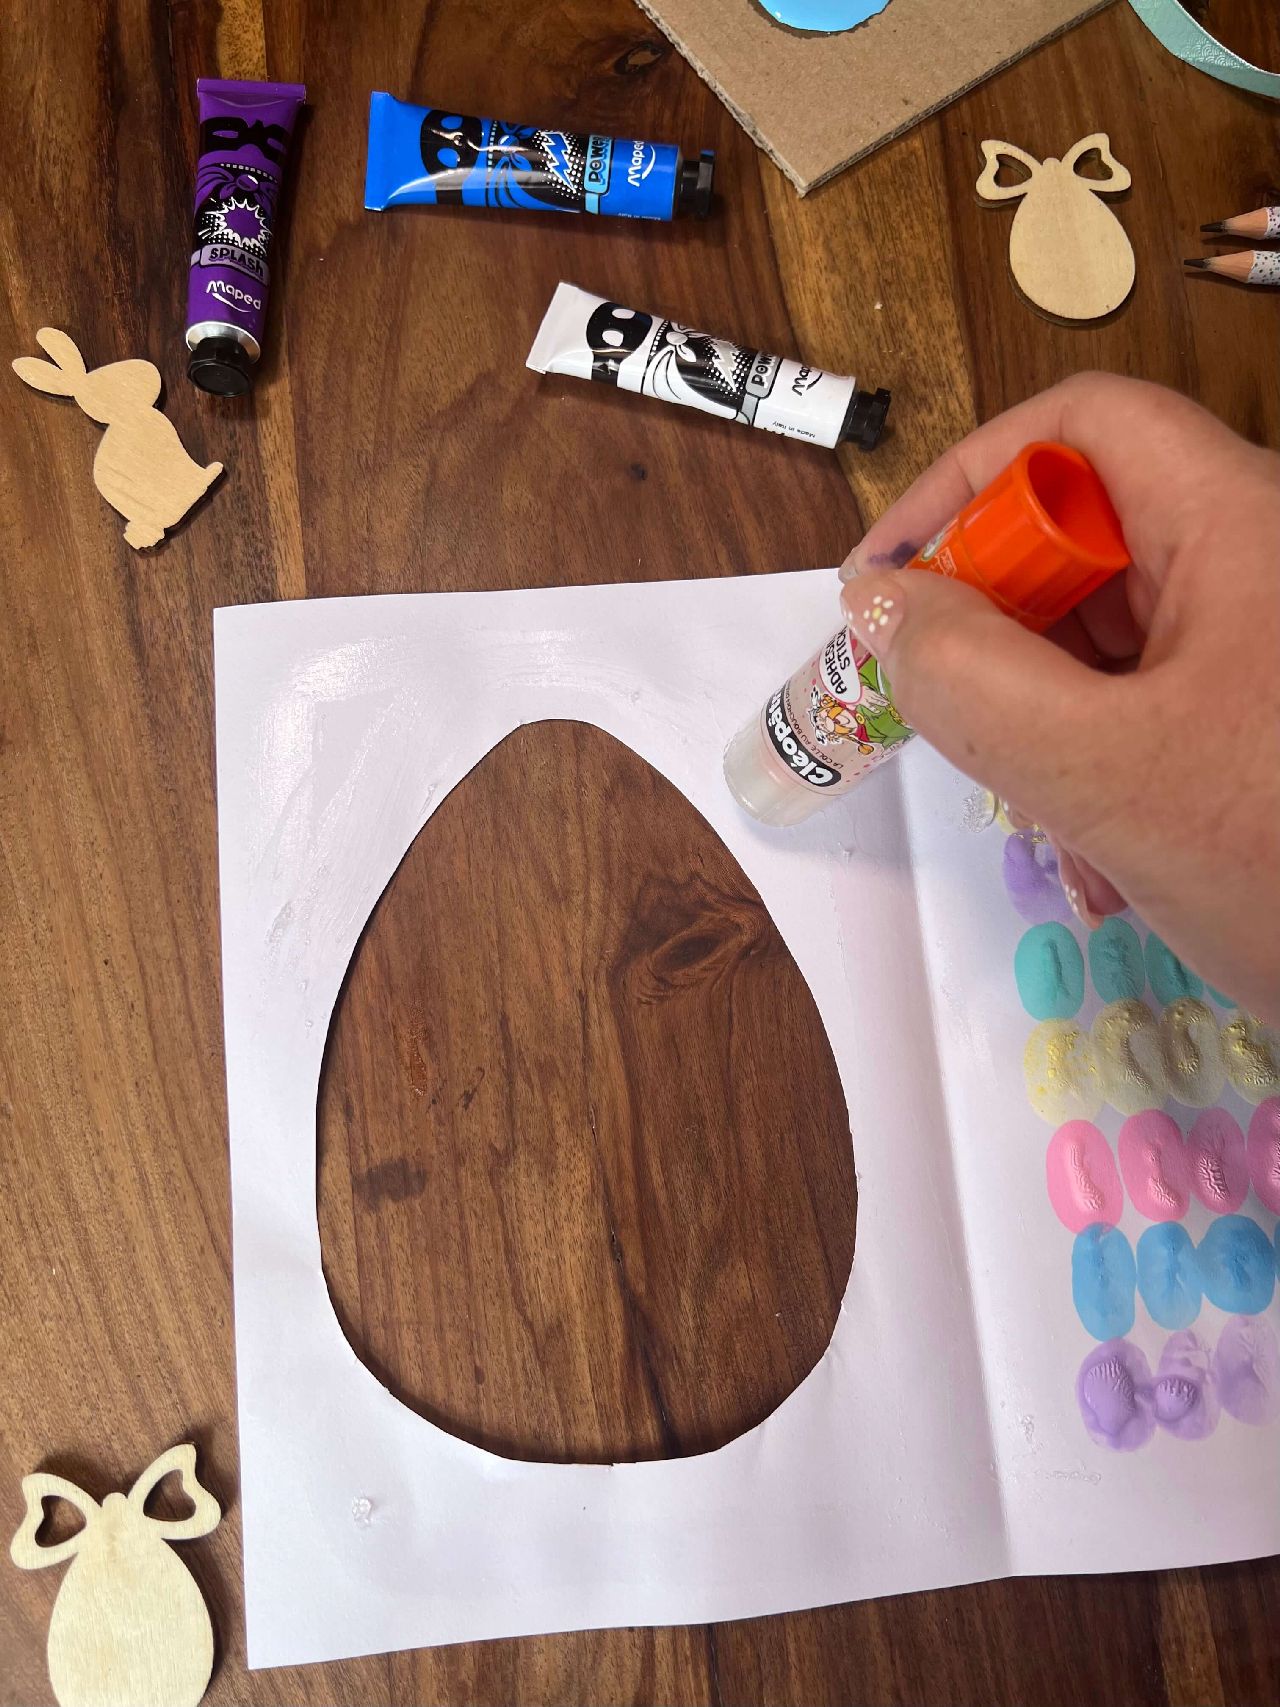 Applying glue around the cut out egg